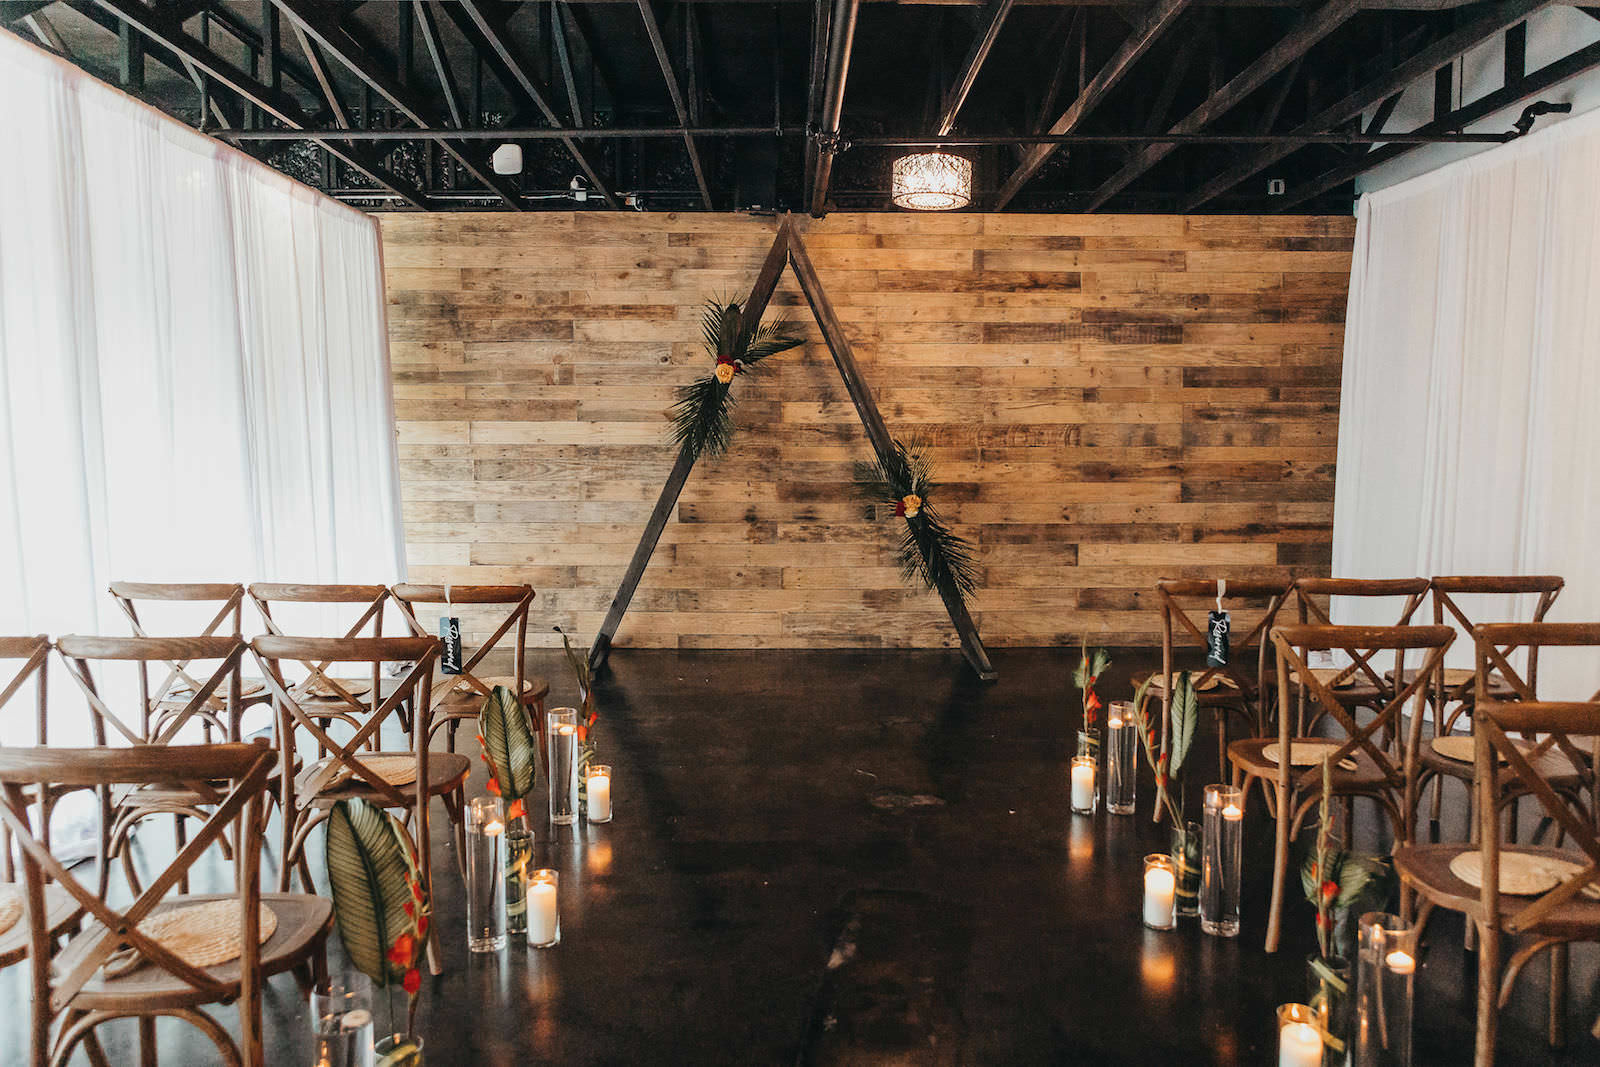 Wooden Cross Back Chairs with Palm and Candle Aisle Décor Detail and Wooden Triangle Arch in Indoor Industrial Ceremony | Tampa Florida Wedding Rentals Gabro Event Services | Venue The West Events